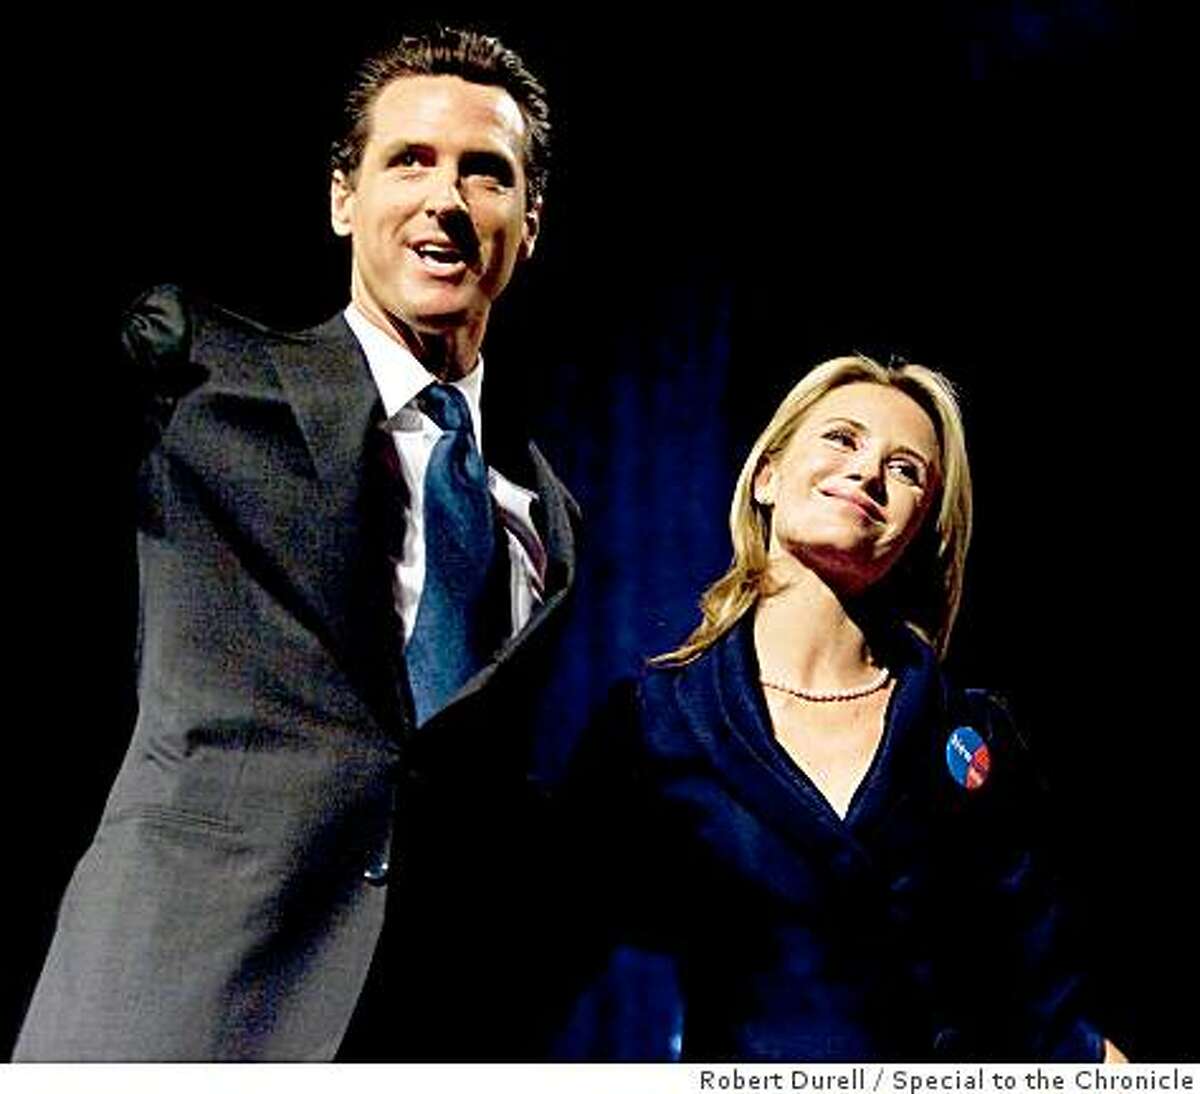 San Francisco mayor and 2010 gubernatorial candidate Gavin Newsom with his wife Jennifer Siebel Newsom after he spoke at the California Democratic Party state convention in Sacramento Saturday morning, April 25, 2009, at the Convention Center. His rival, state attorney general Jerry Brown, laer addressed the delegates. The convention concludes Sunday.